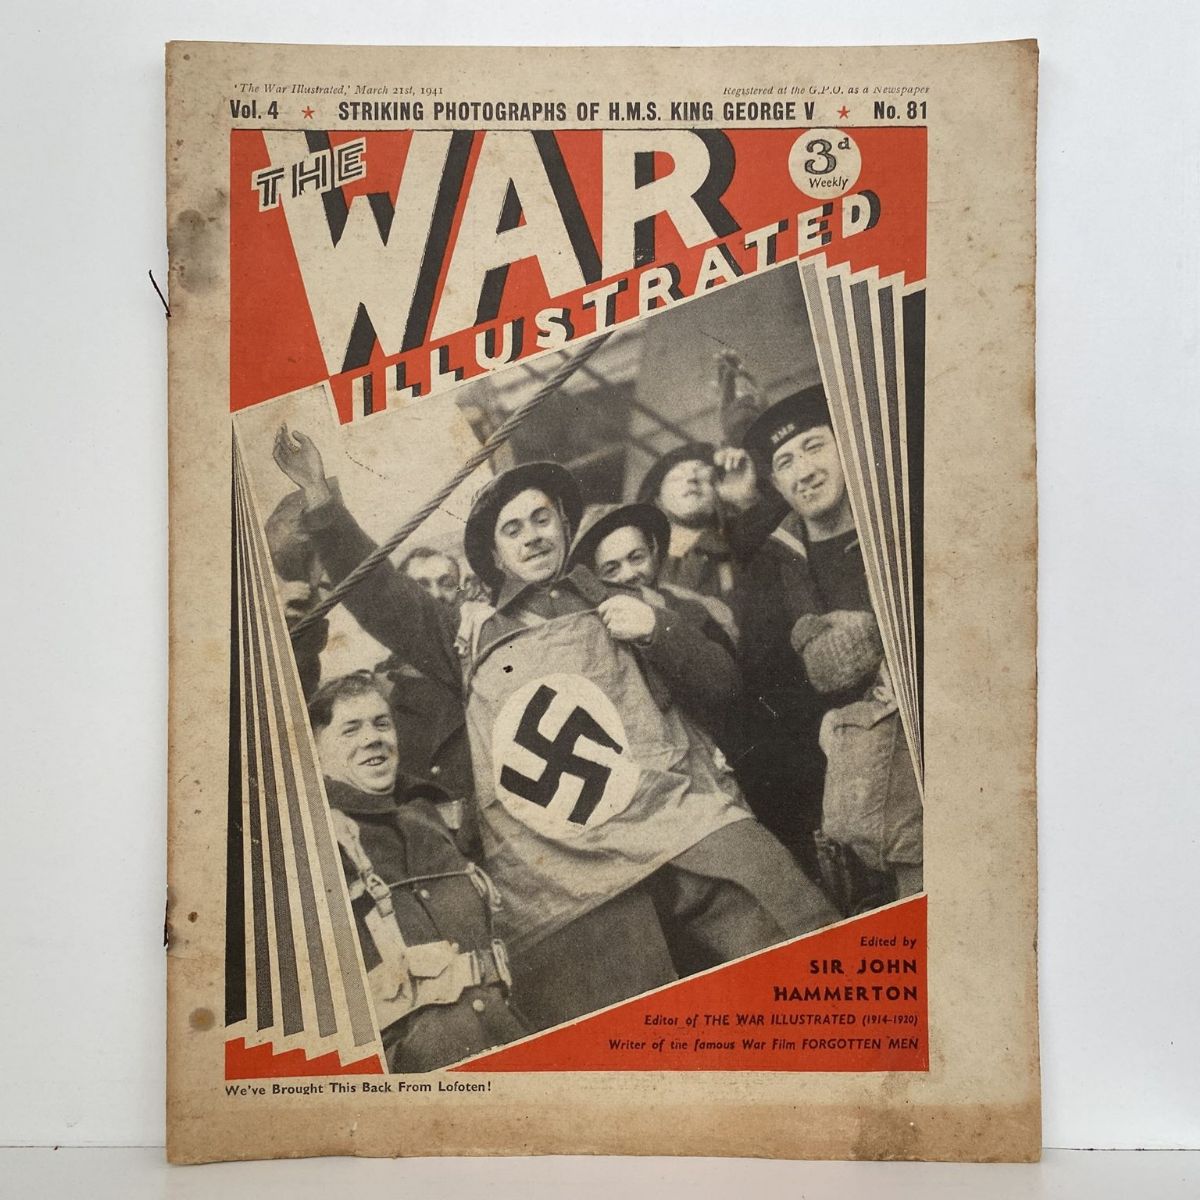 THE WAR ILLUSTRATED - Vol 4, No 81, 21st March 1941